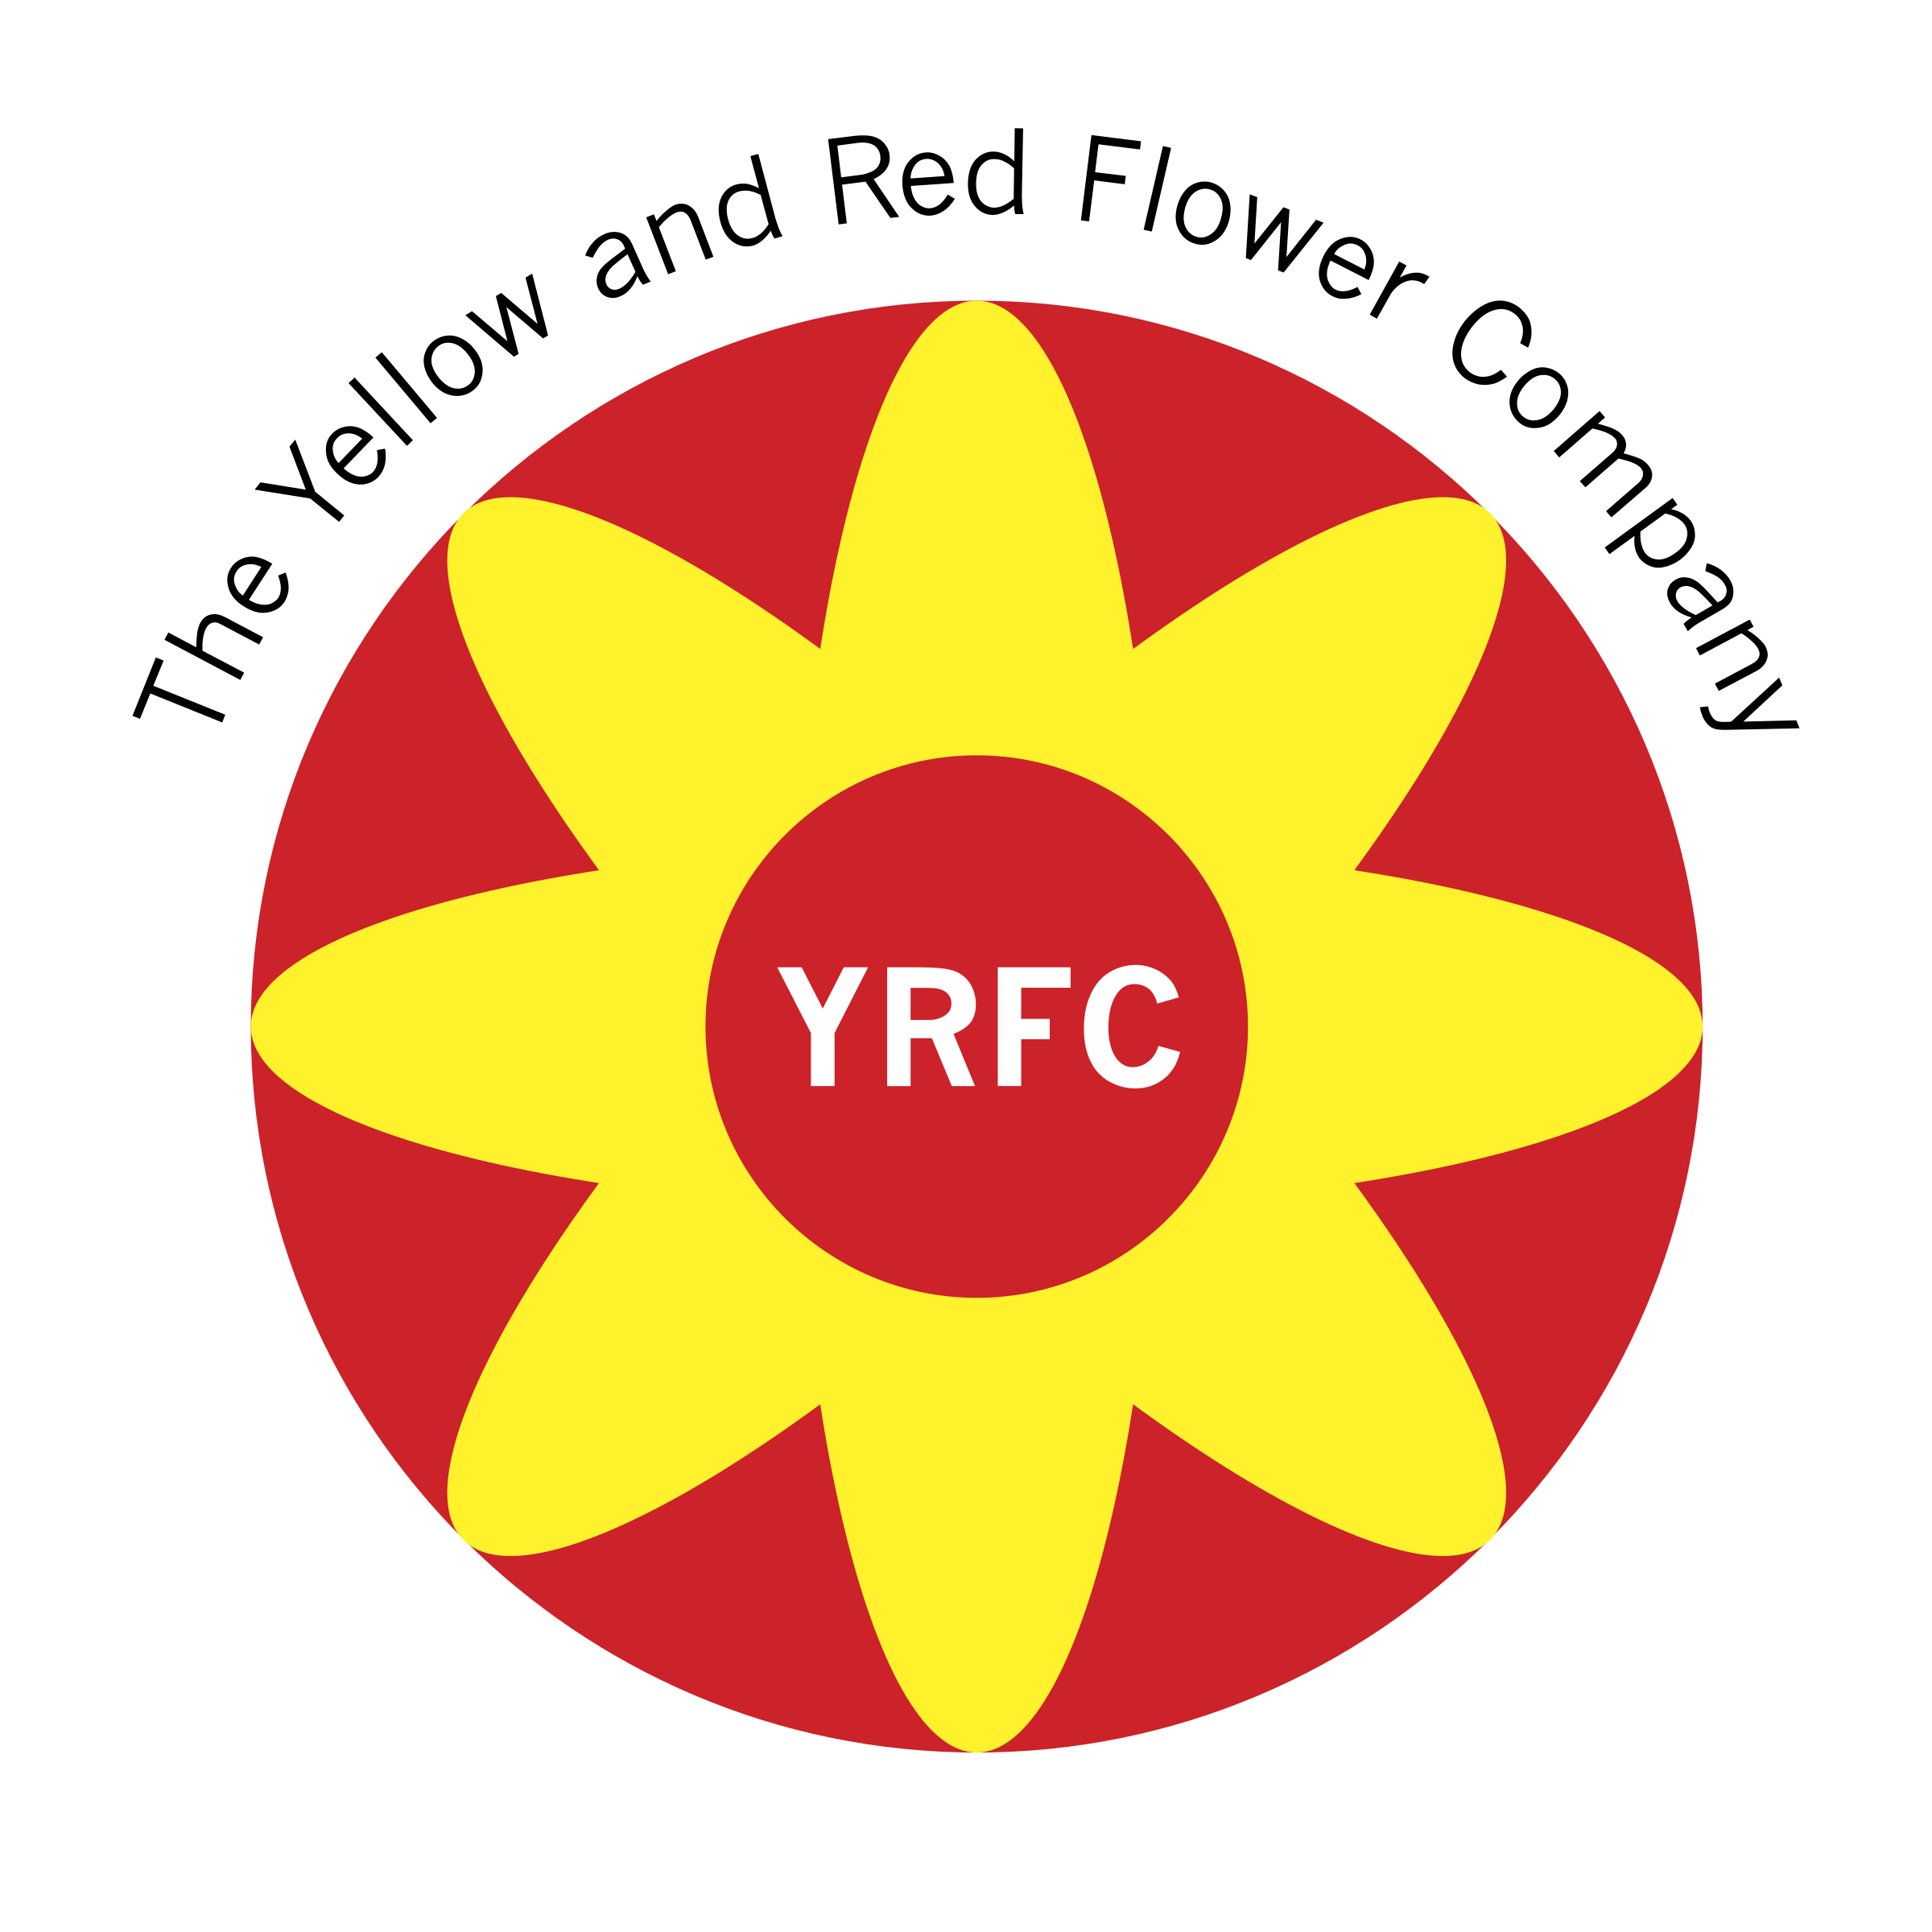 Yellow Flower Looking Company Logo - The Yellow and Red Flower Company Logo PNG Transparent & SVG Vector ...